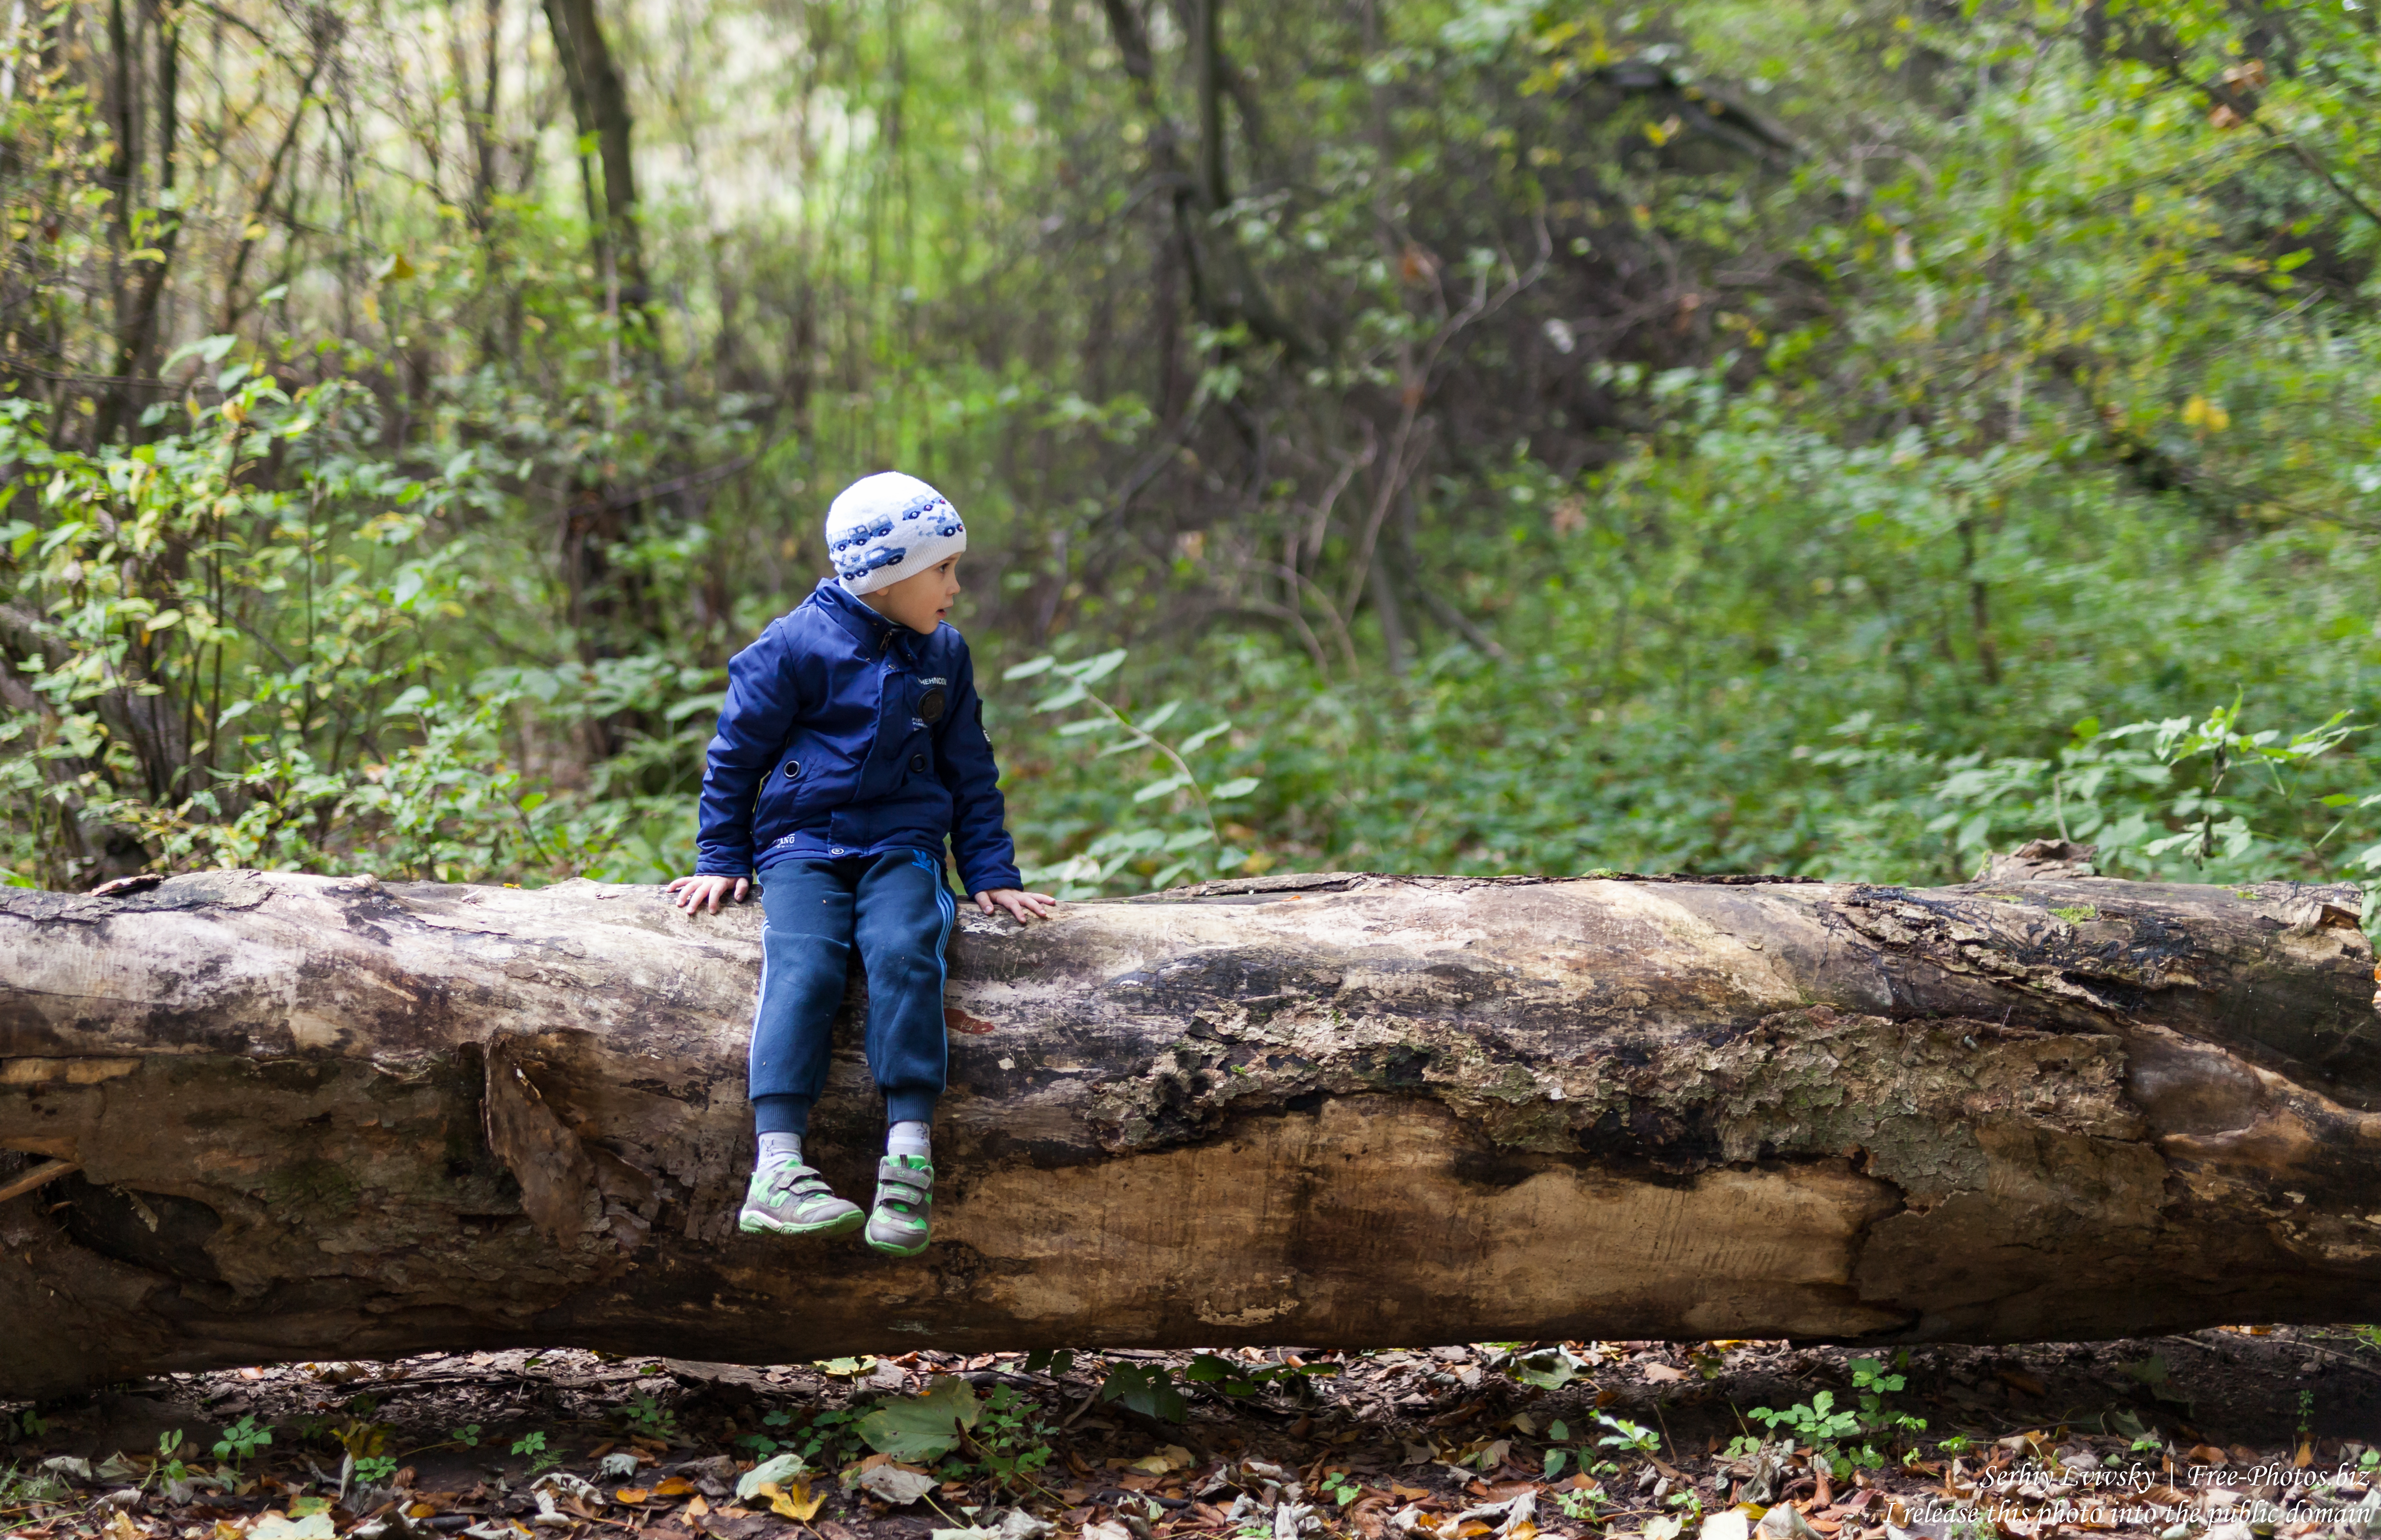 a 5-year-old boy photographed by Serhiy Lvivsky in October 2018 using a Sigma 50mm F1.4 DG HSM Art lens, picture 2